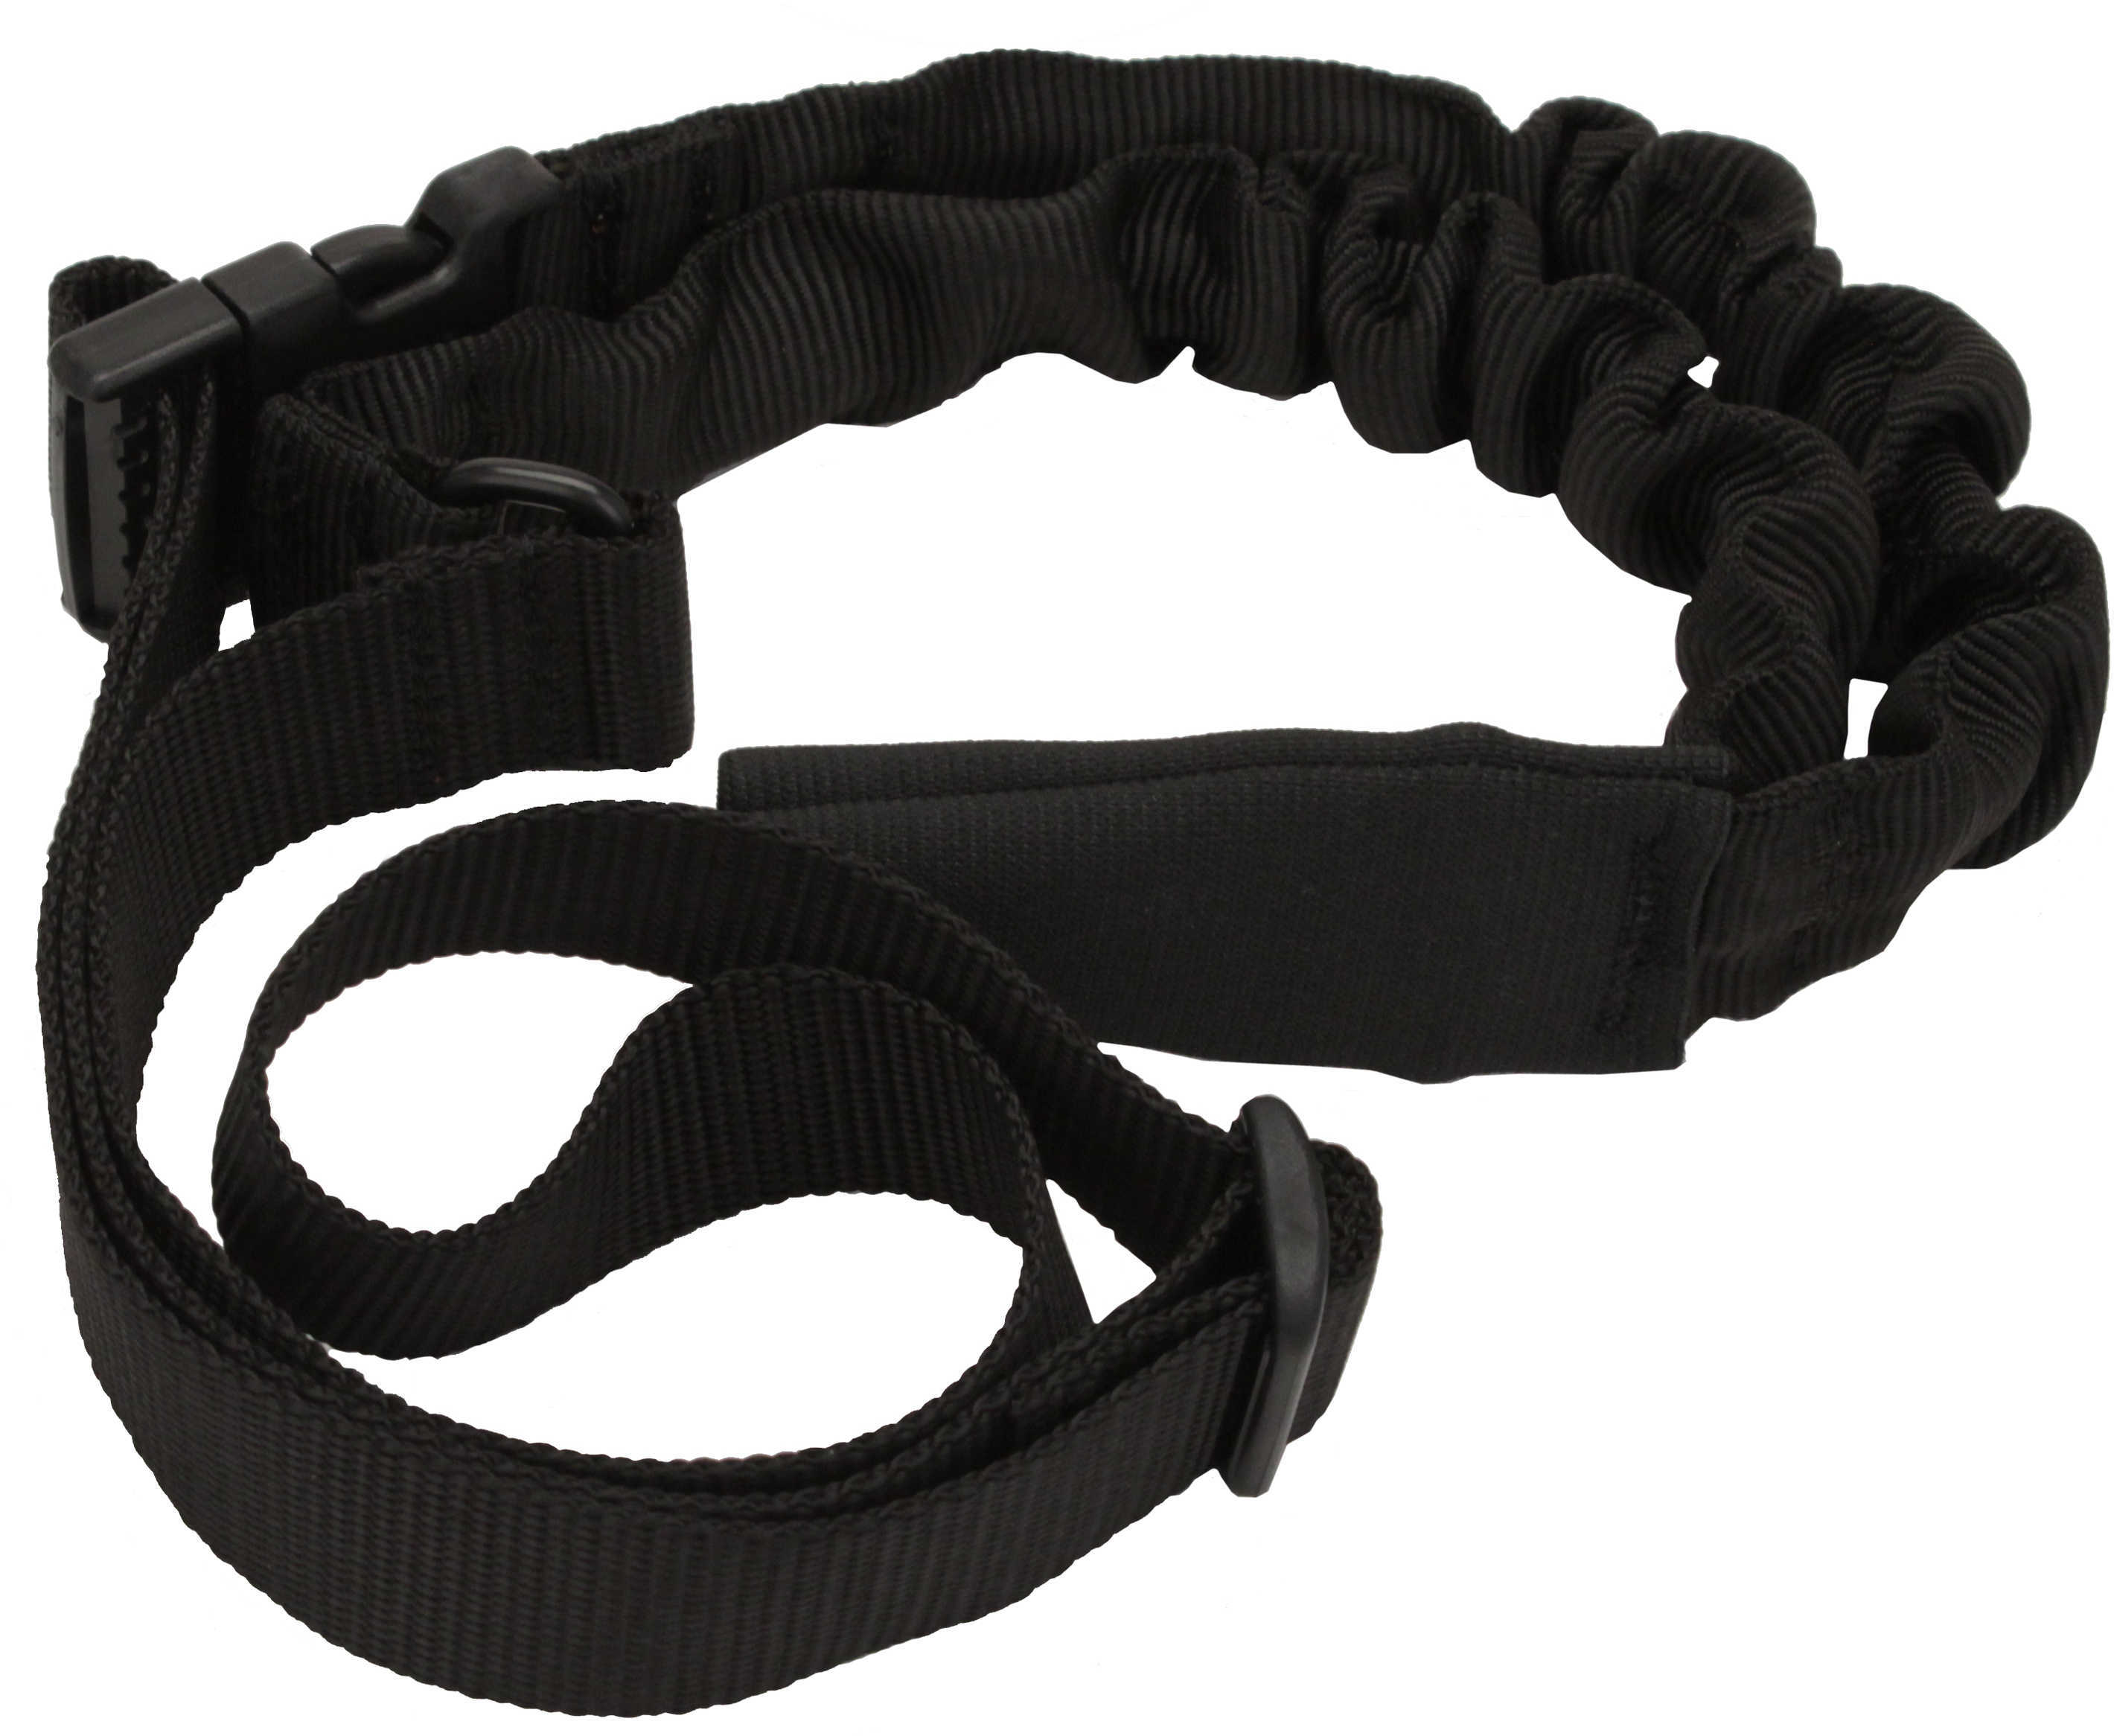 Ergo Single Point Bungee Sling with Mash Hook Md: 4974